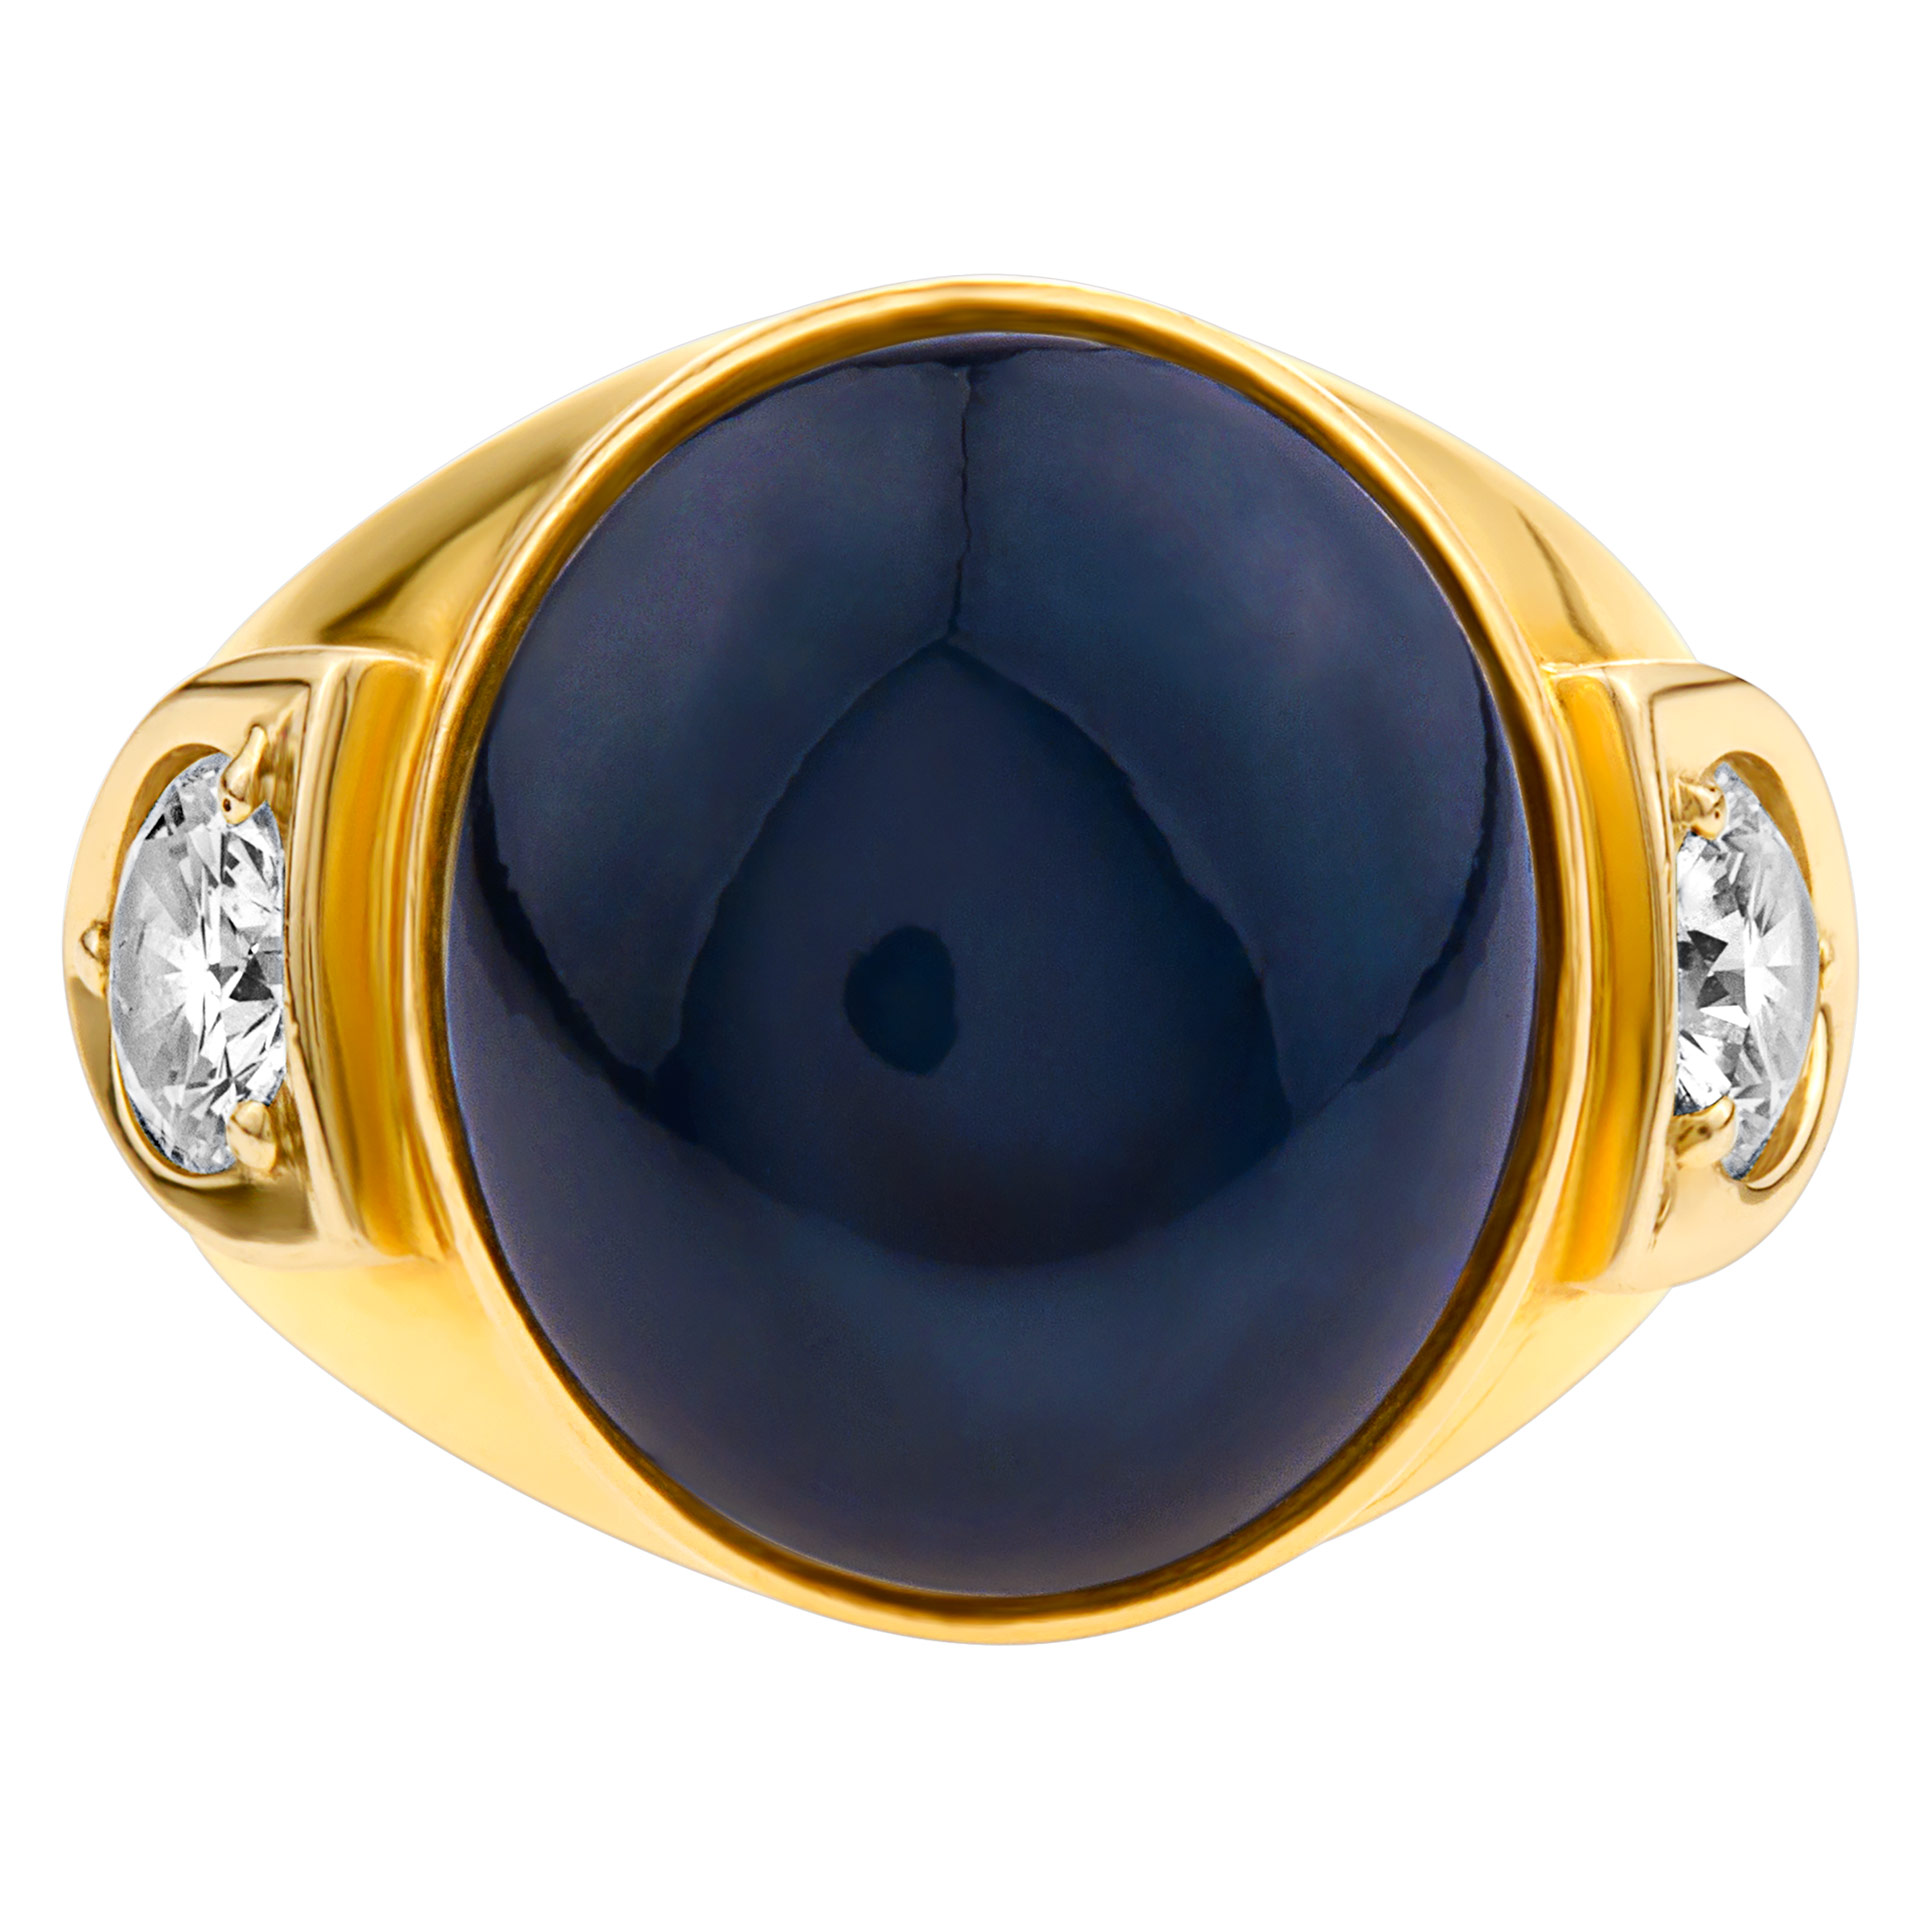 Star Sapphire ring set in 14k yellow gold image 1